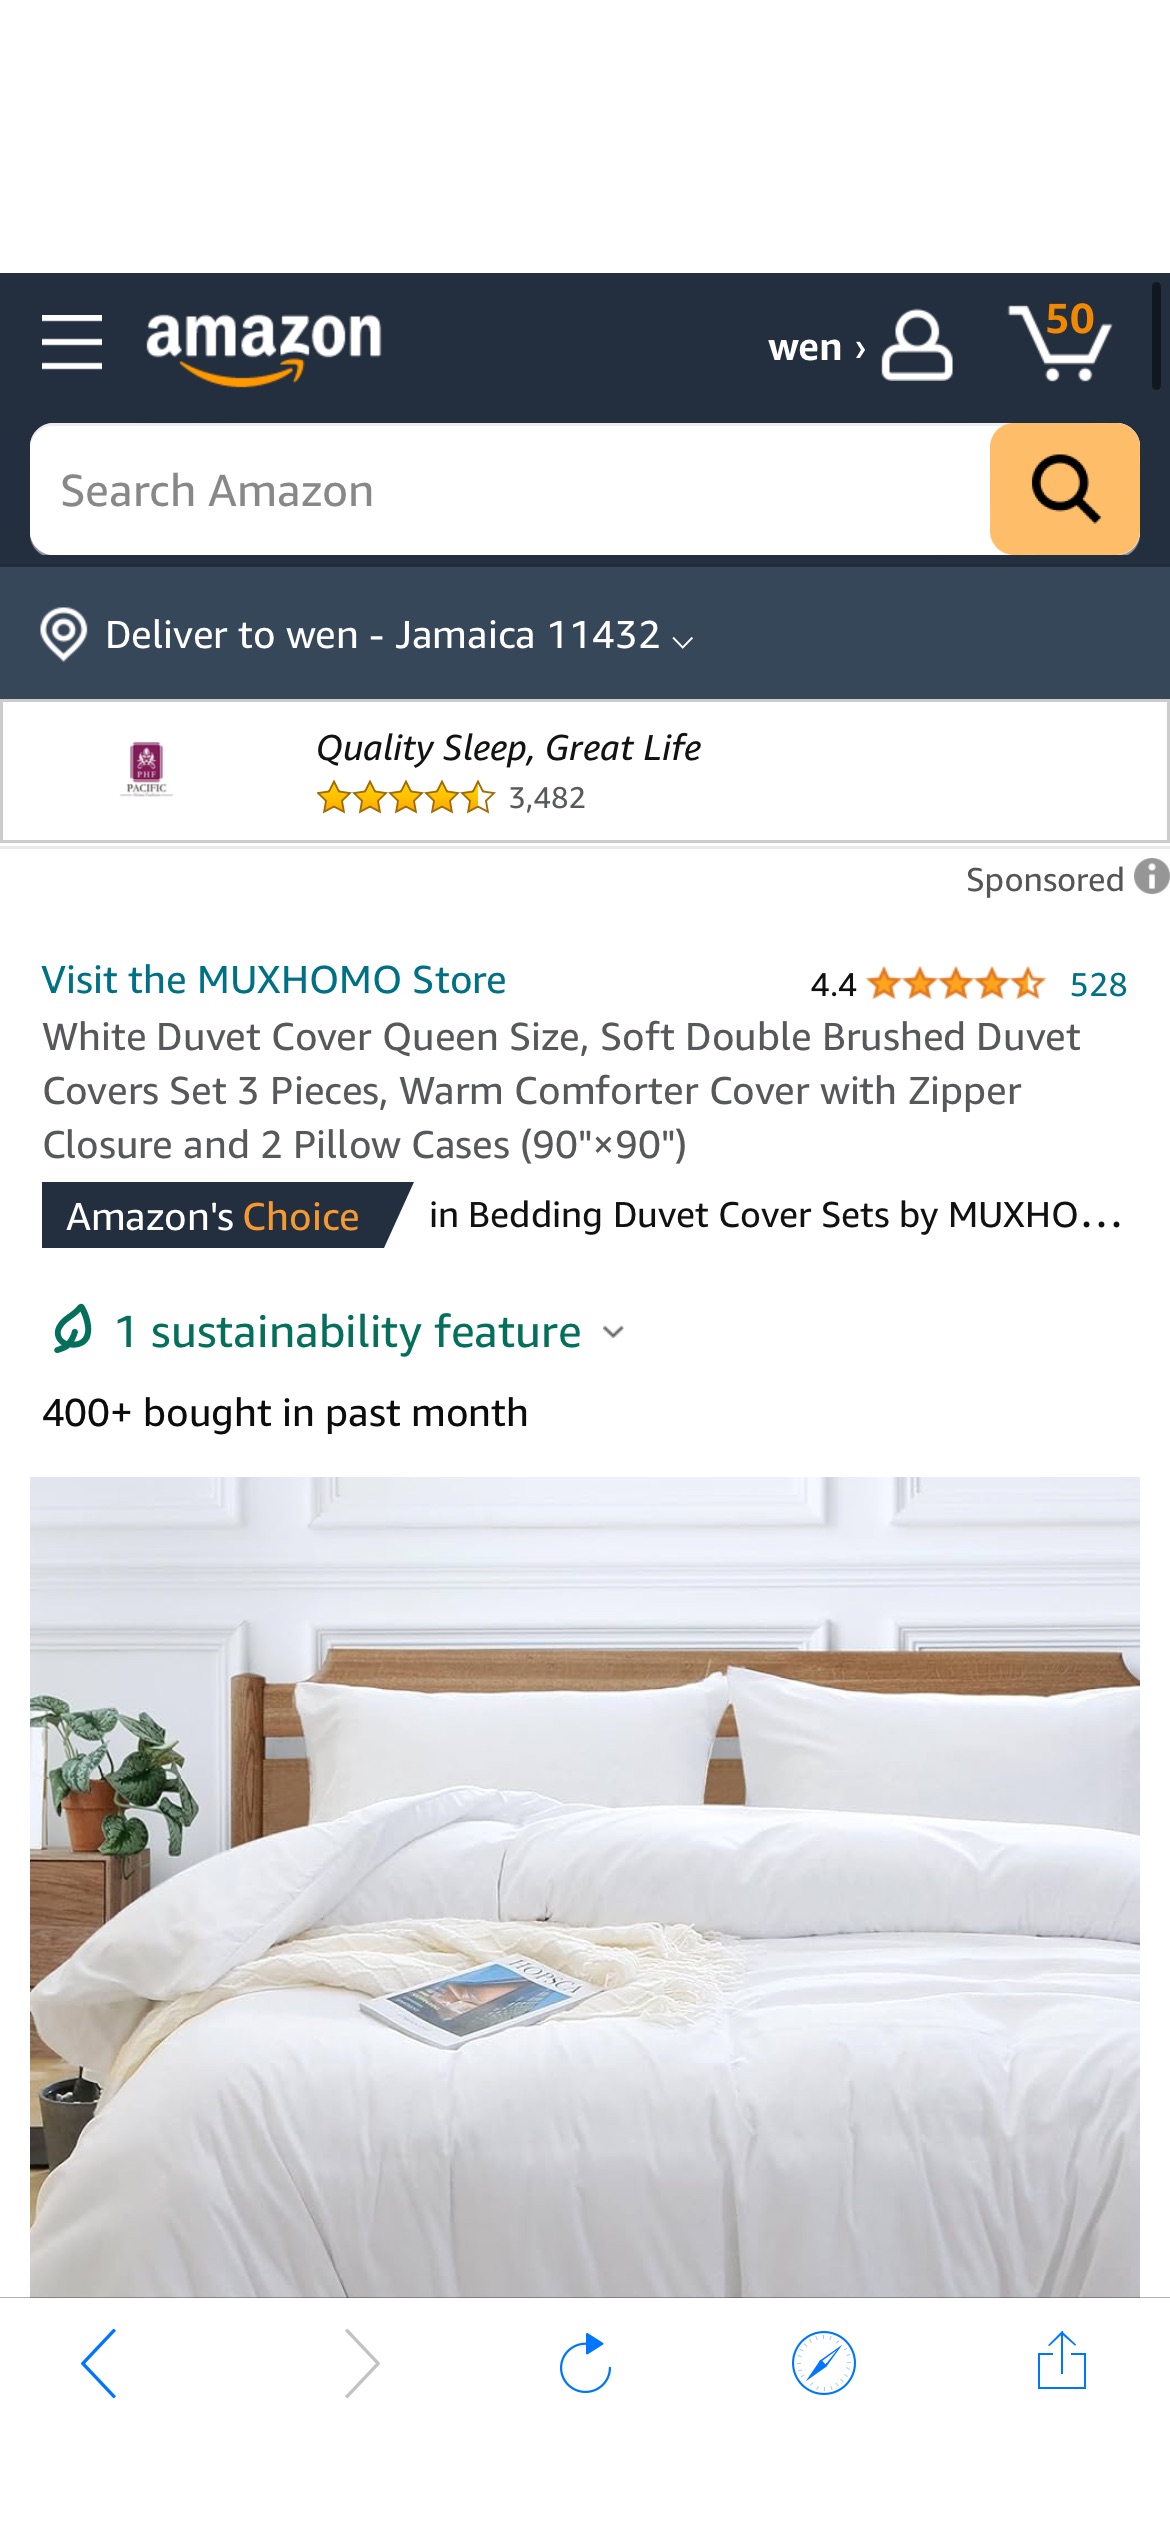 Amazon.com: MUXHOMO White Duvet Cover Queen Size, Soft Double Brushed Duvet Covers Set 3 Pieces, Warm Comforter Cover with Zipper Closure and 2 Pillow Cases (90"×90") : Home & Kitchen